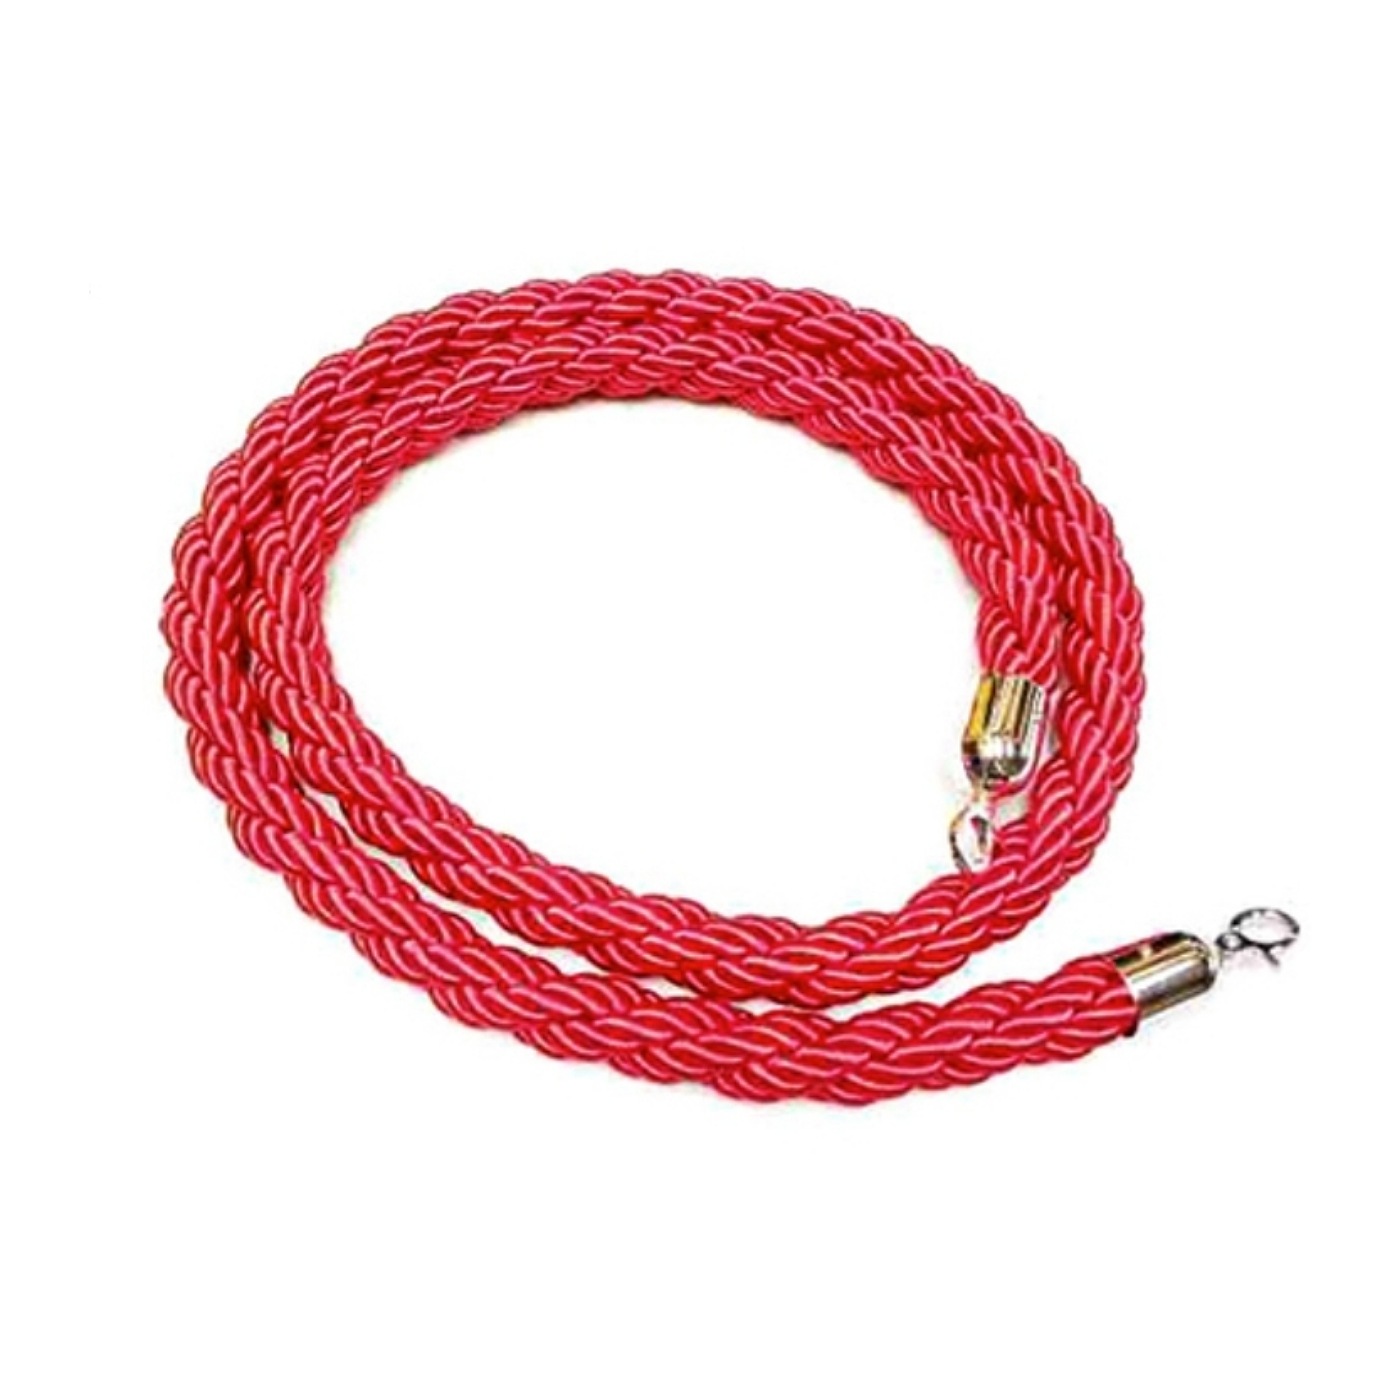 Red Braided Stanchion Rope With Silver Clasp.